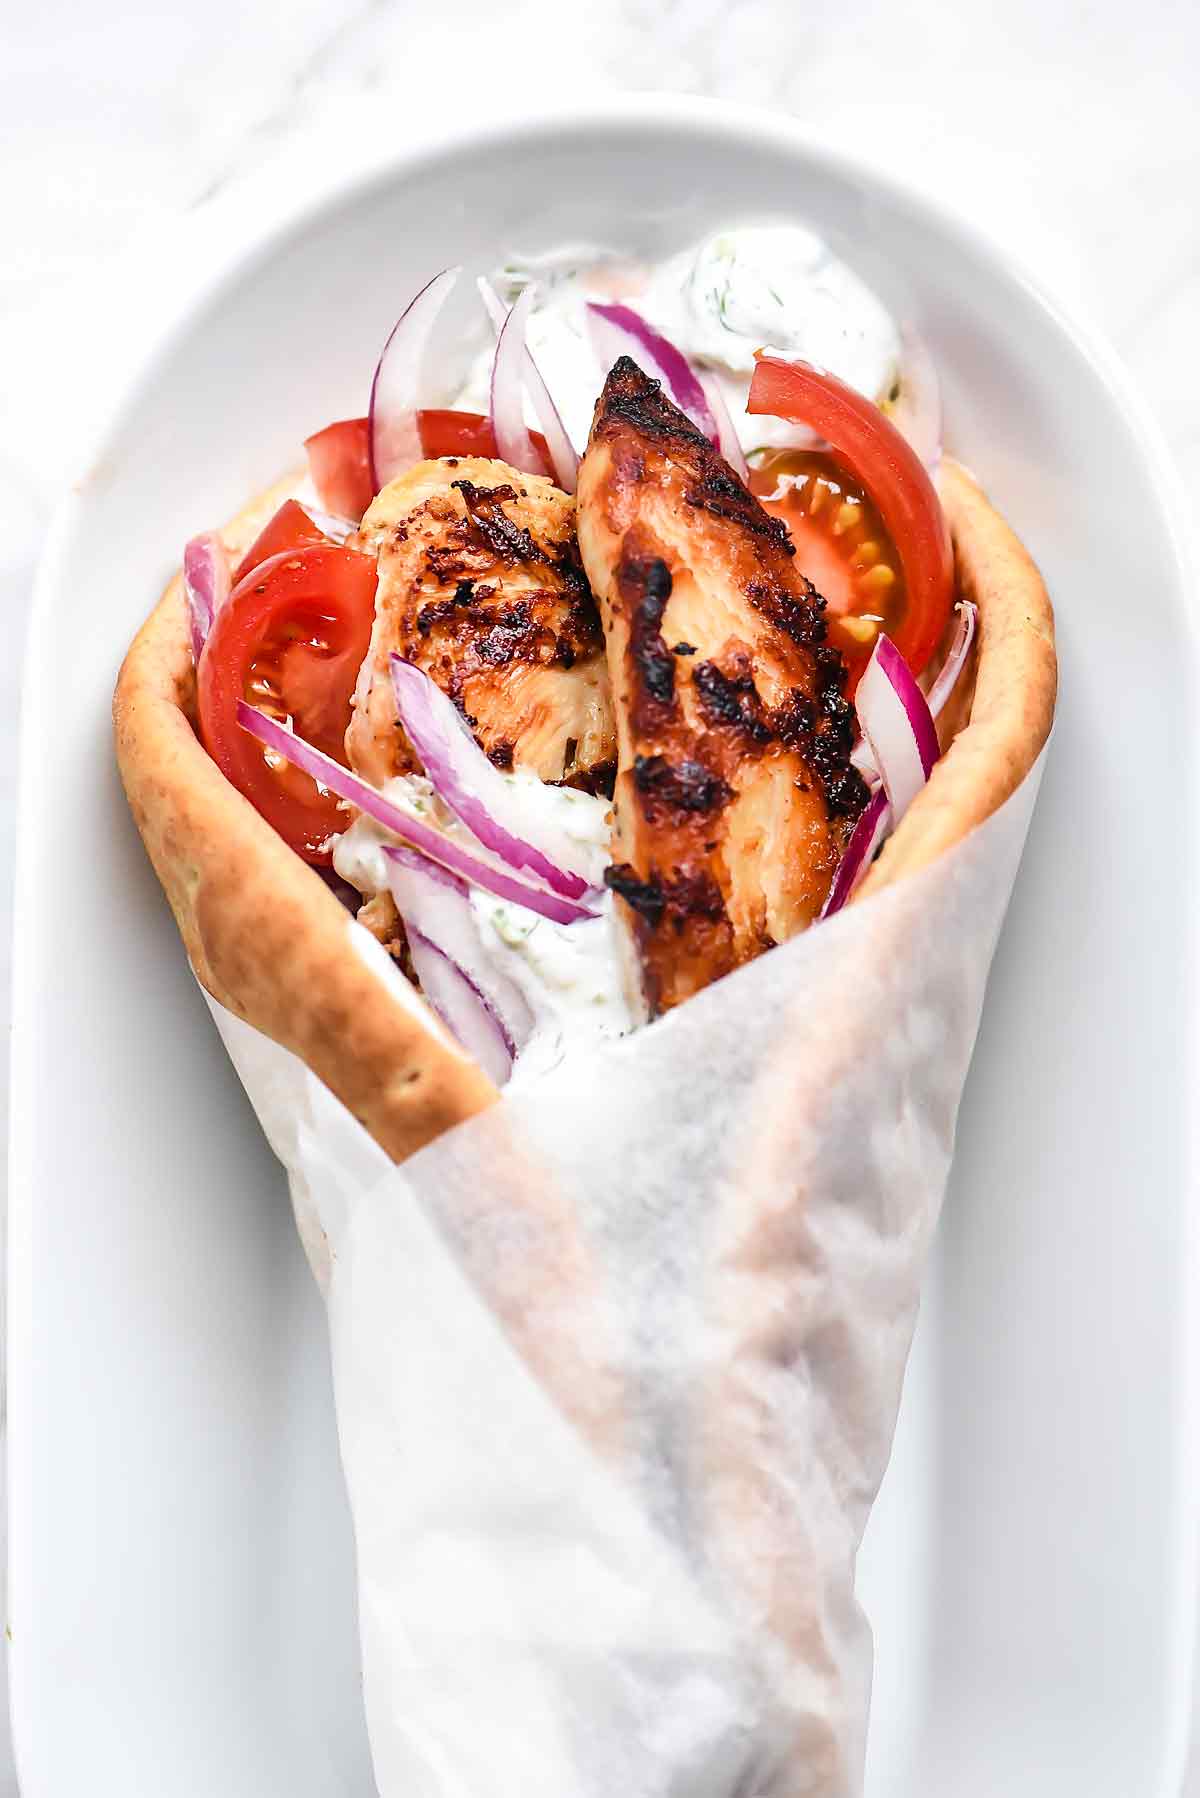 Easy Chicken Gyro Recipe With Tzatziki Sauce Foodiecrush Com,How Long To Cook 1 Inch Pork Chops At 350